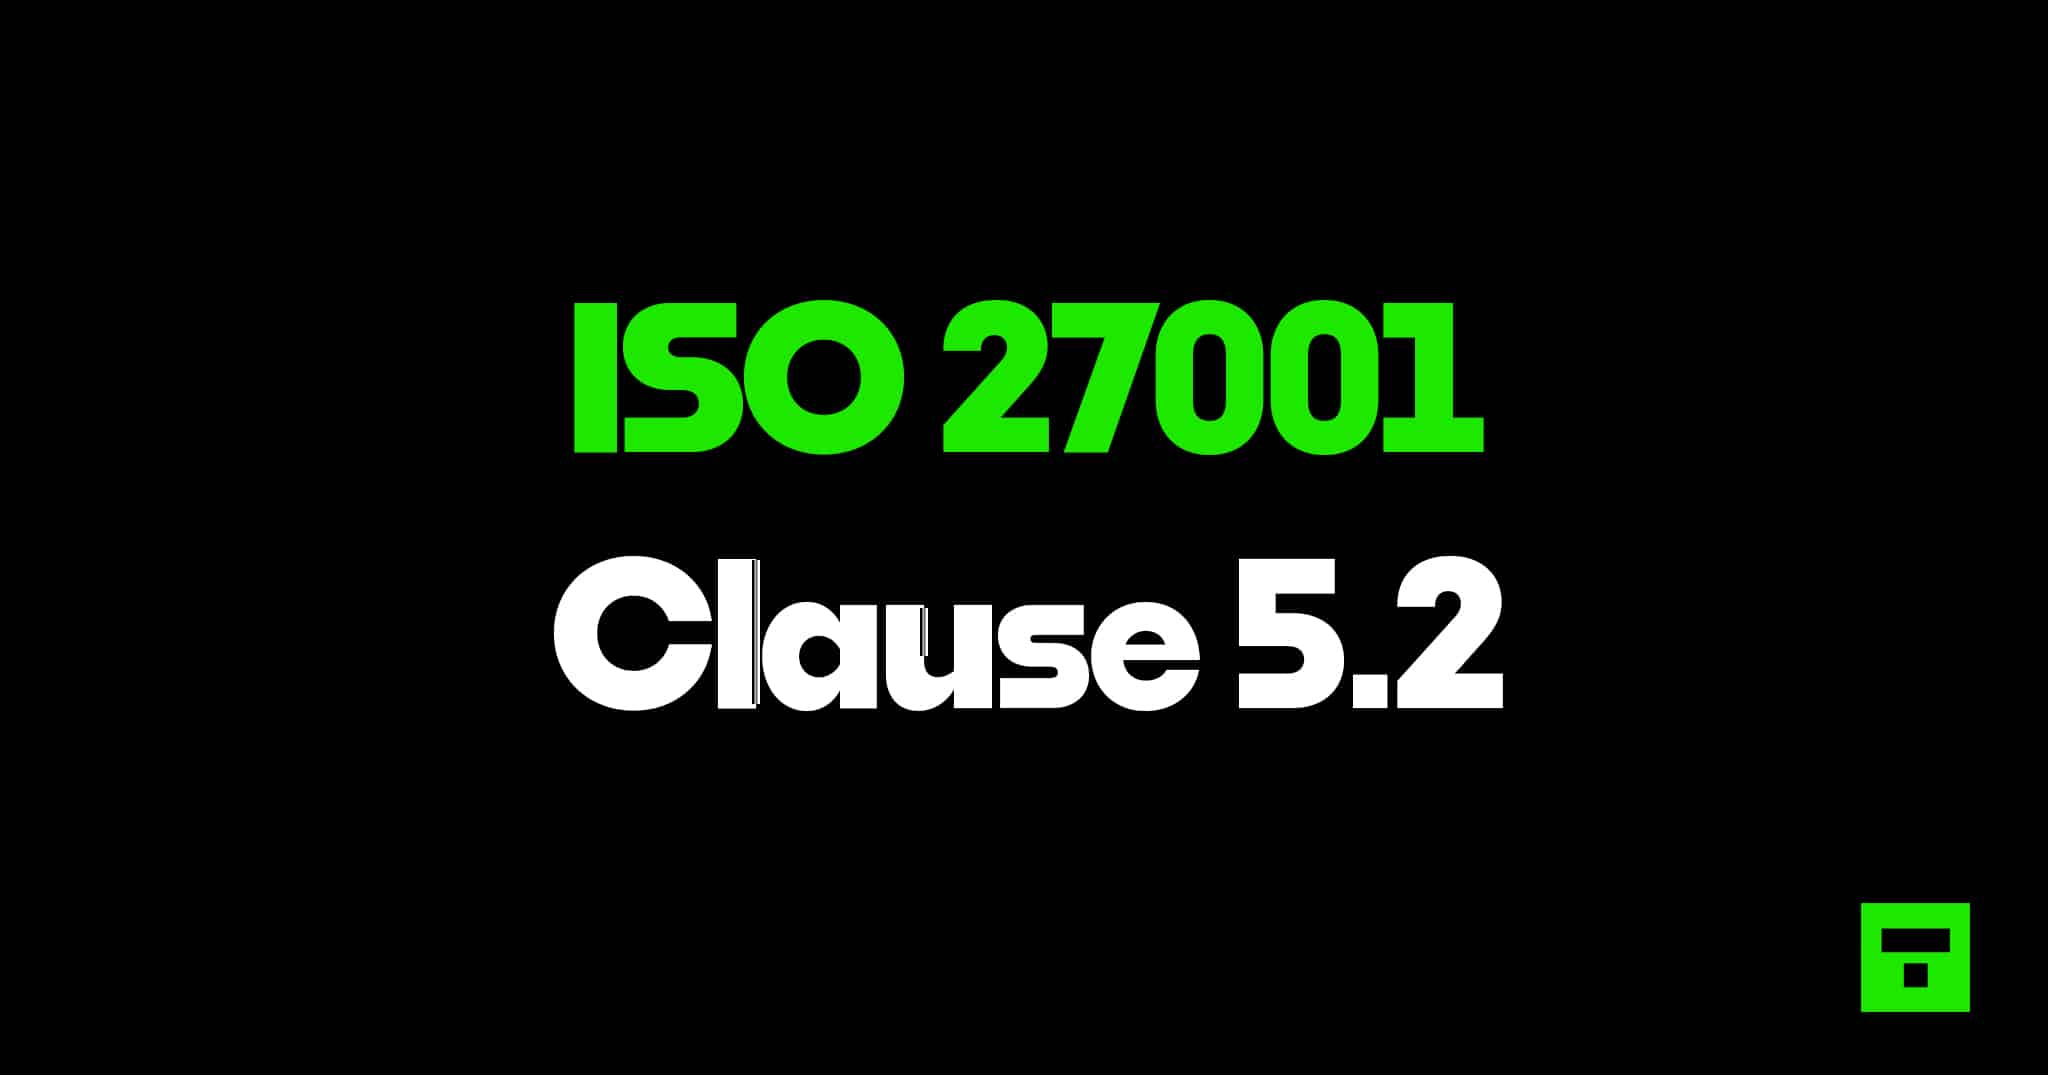 ISO 27001 Clause 5.2 Policy